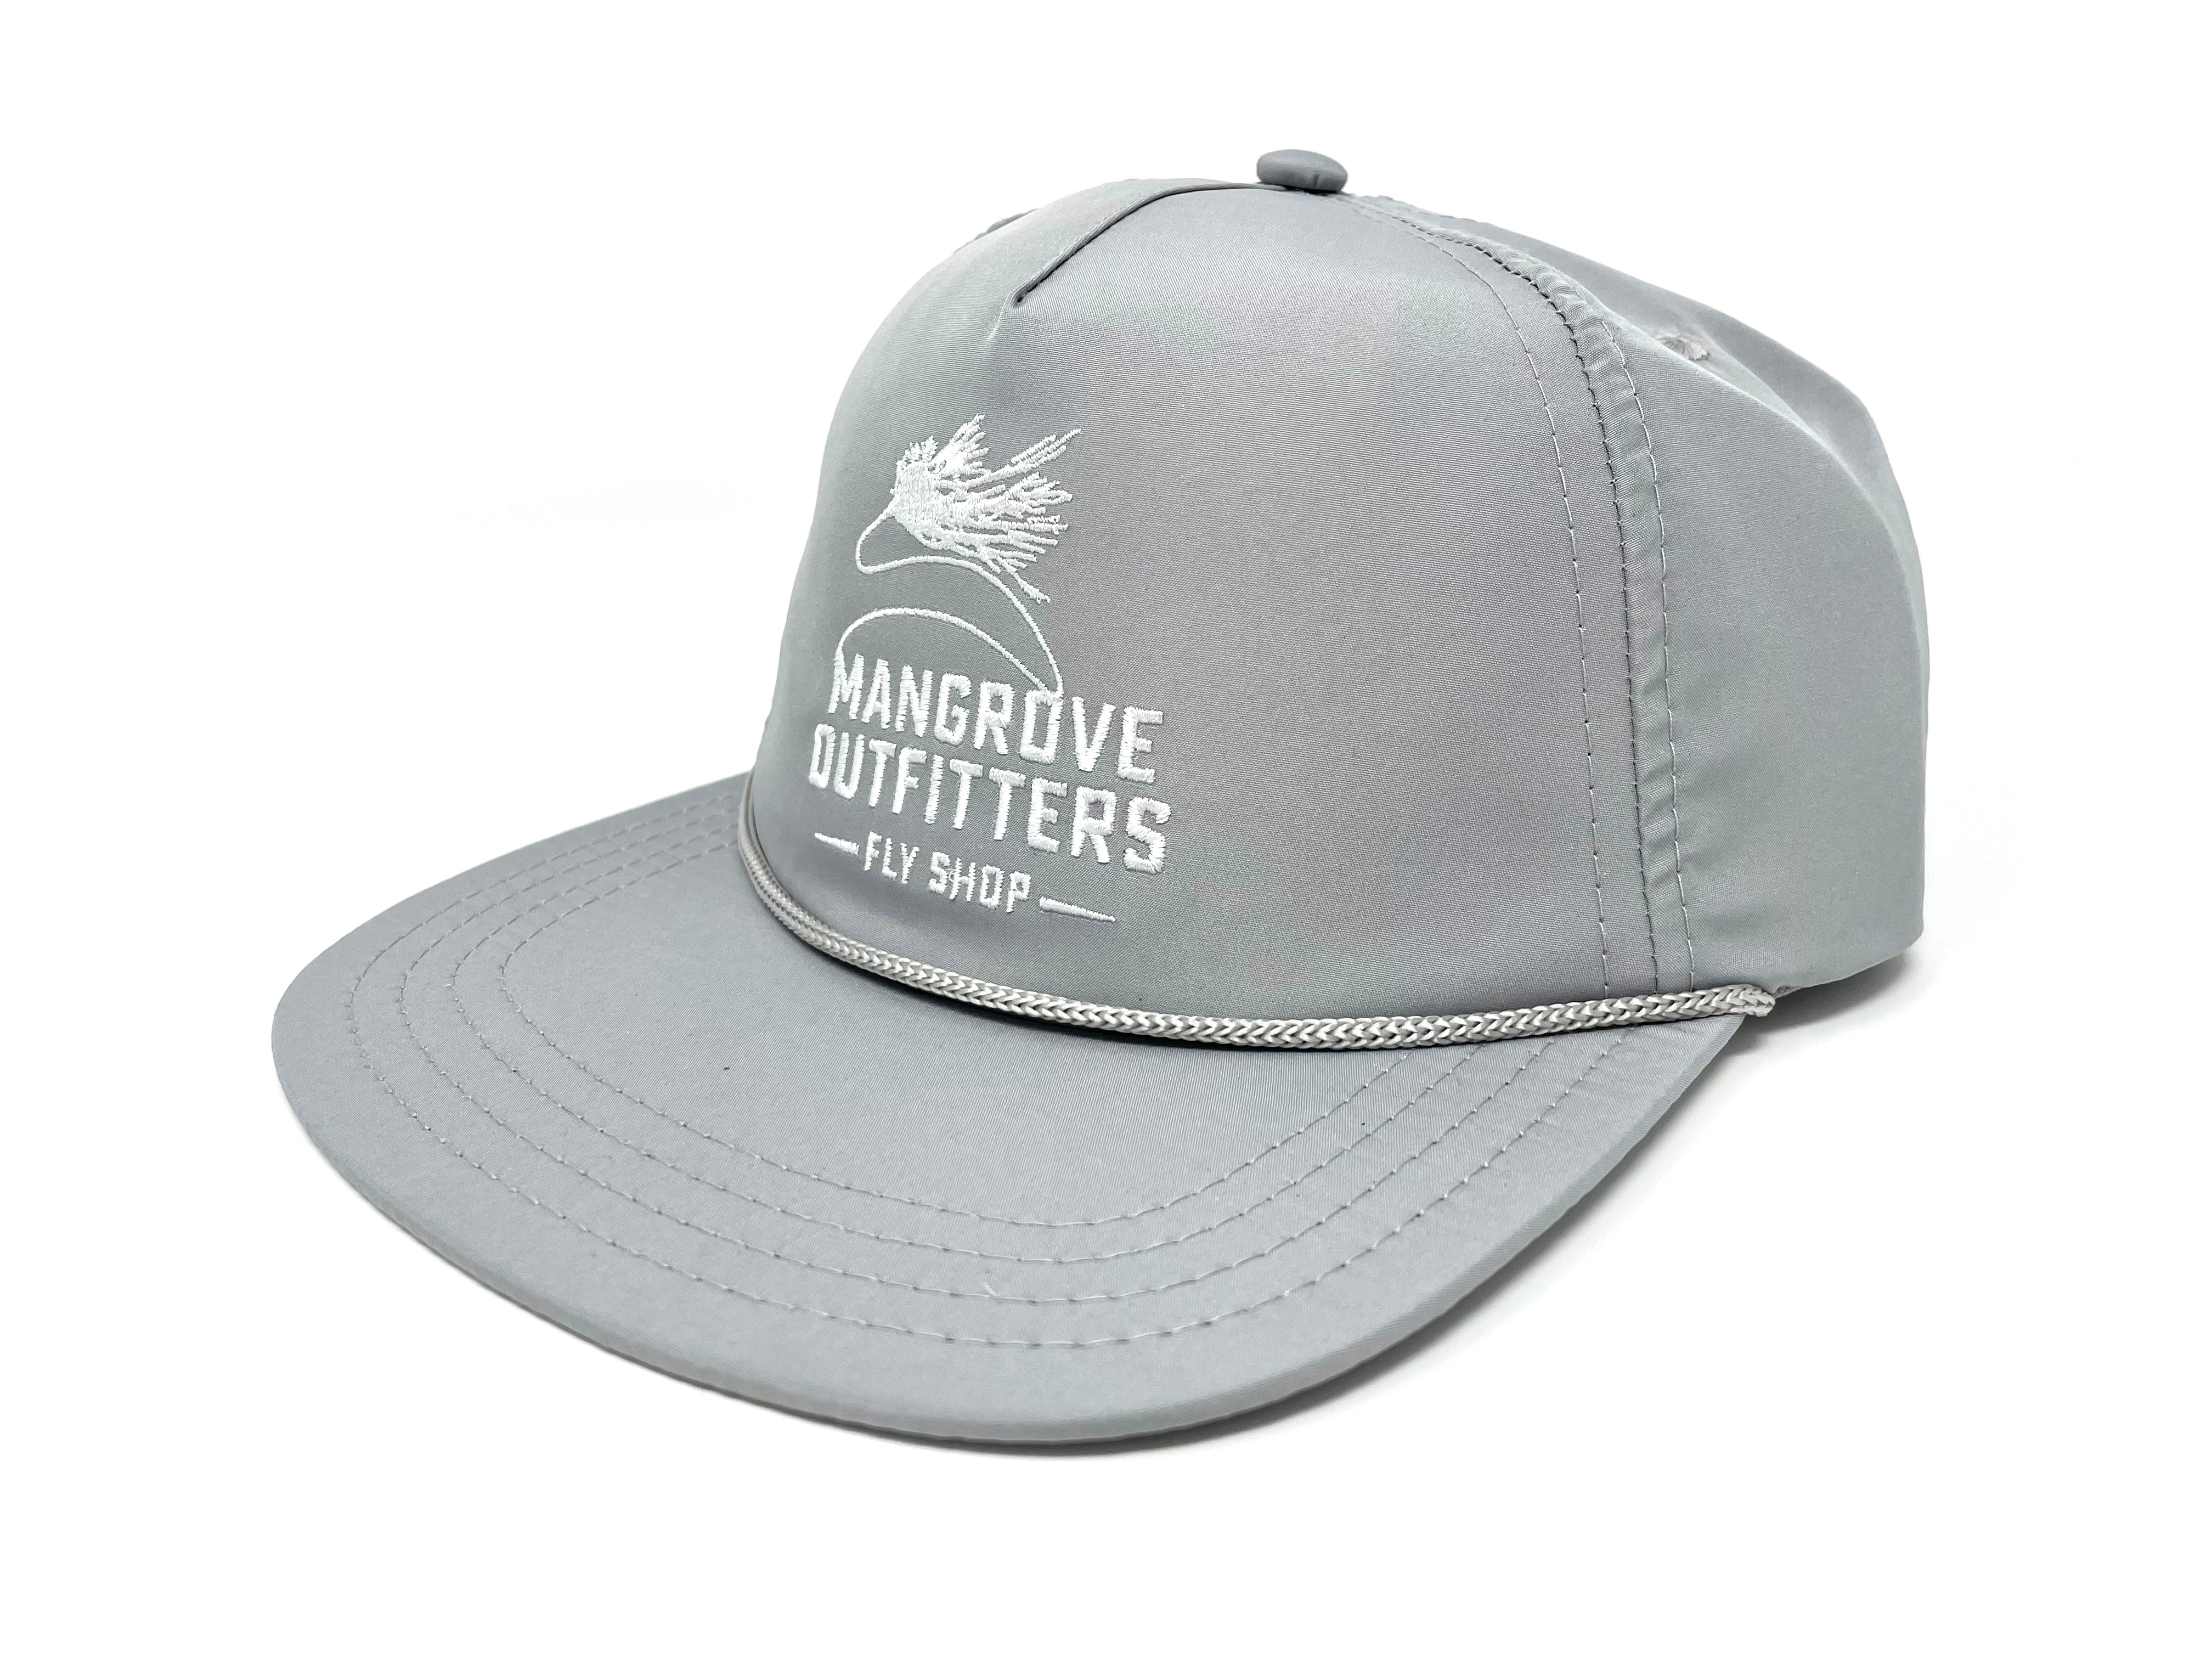 Mangrove Outfitters Fly Shop Hat (LOW CROWN)